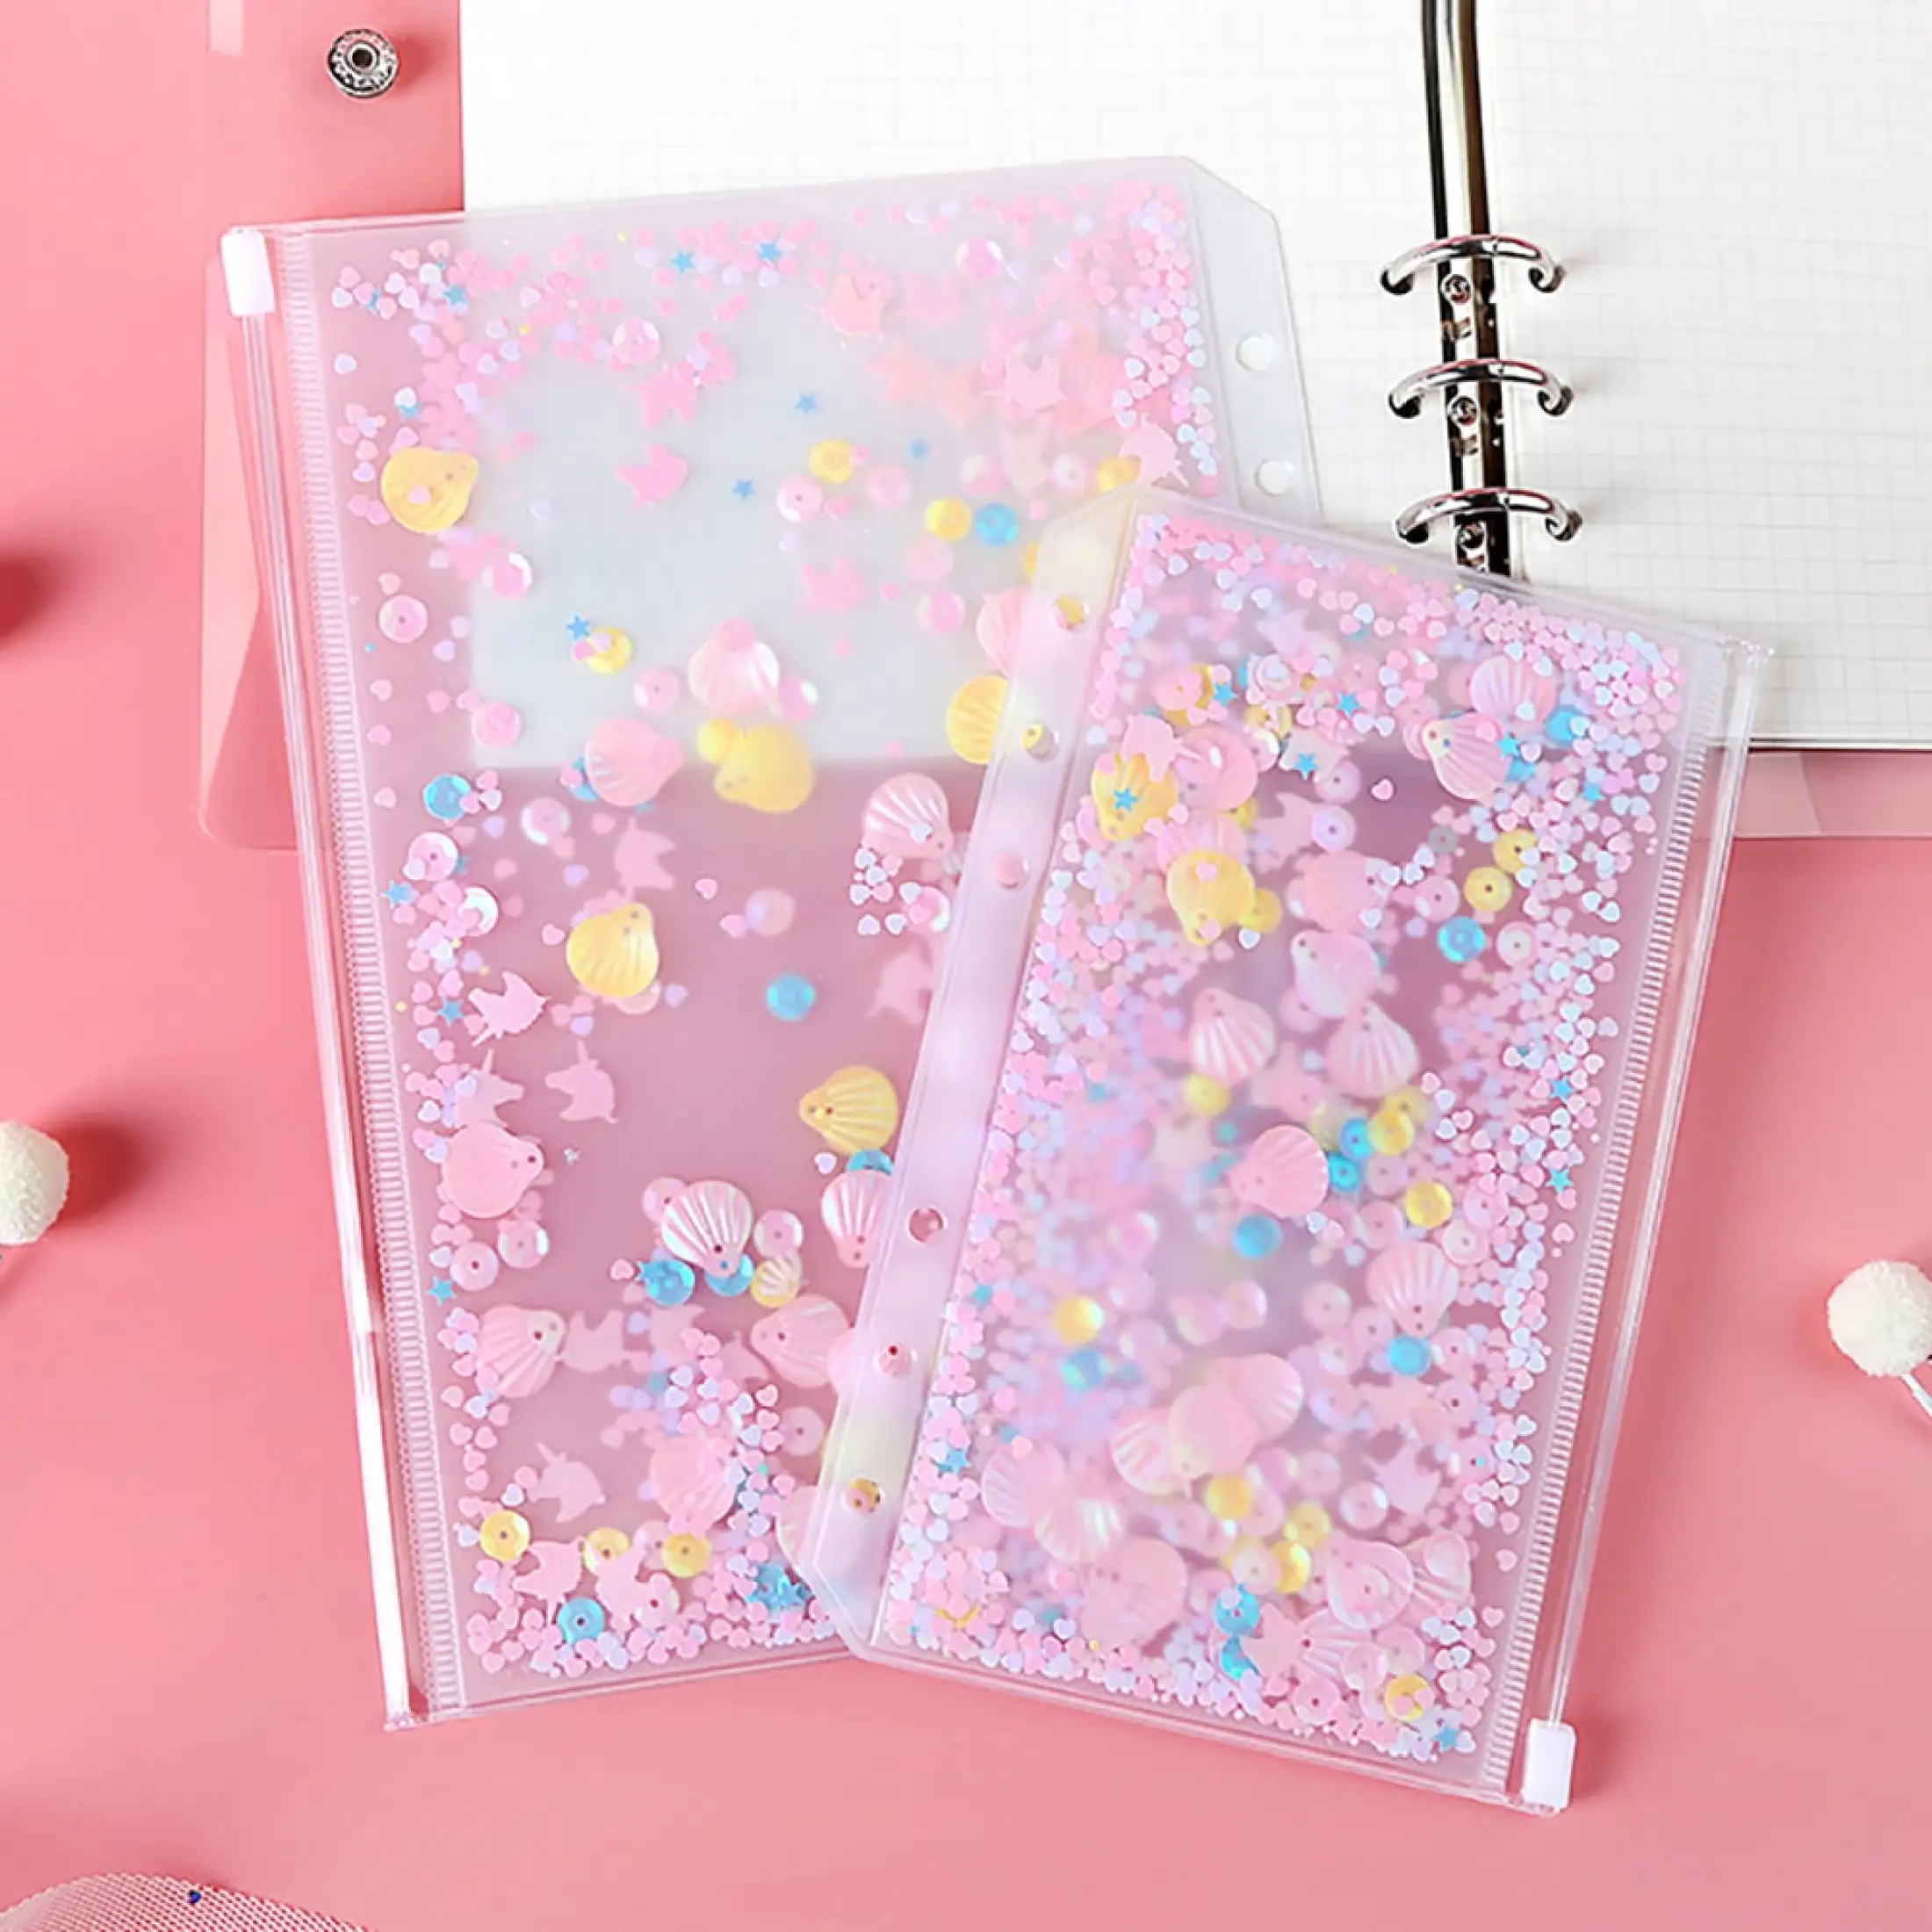 A6 17cm 6 Holes Cover Round Ring Binder File Folder Monthly Plan Refill Paper, A5 Refill Paper for A5 21cm